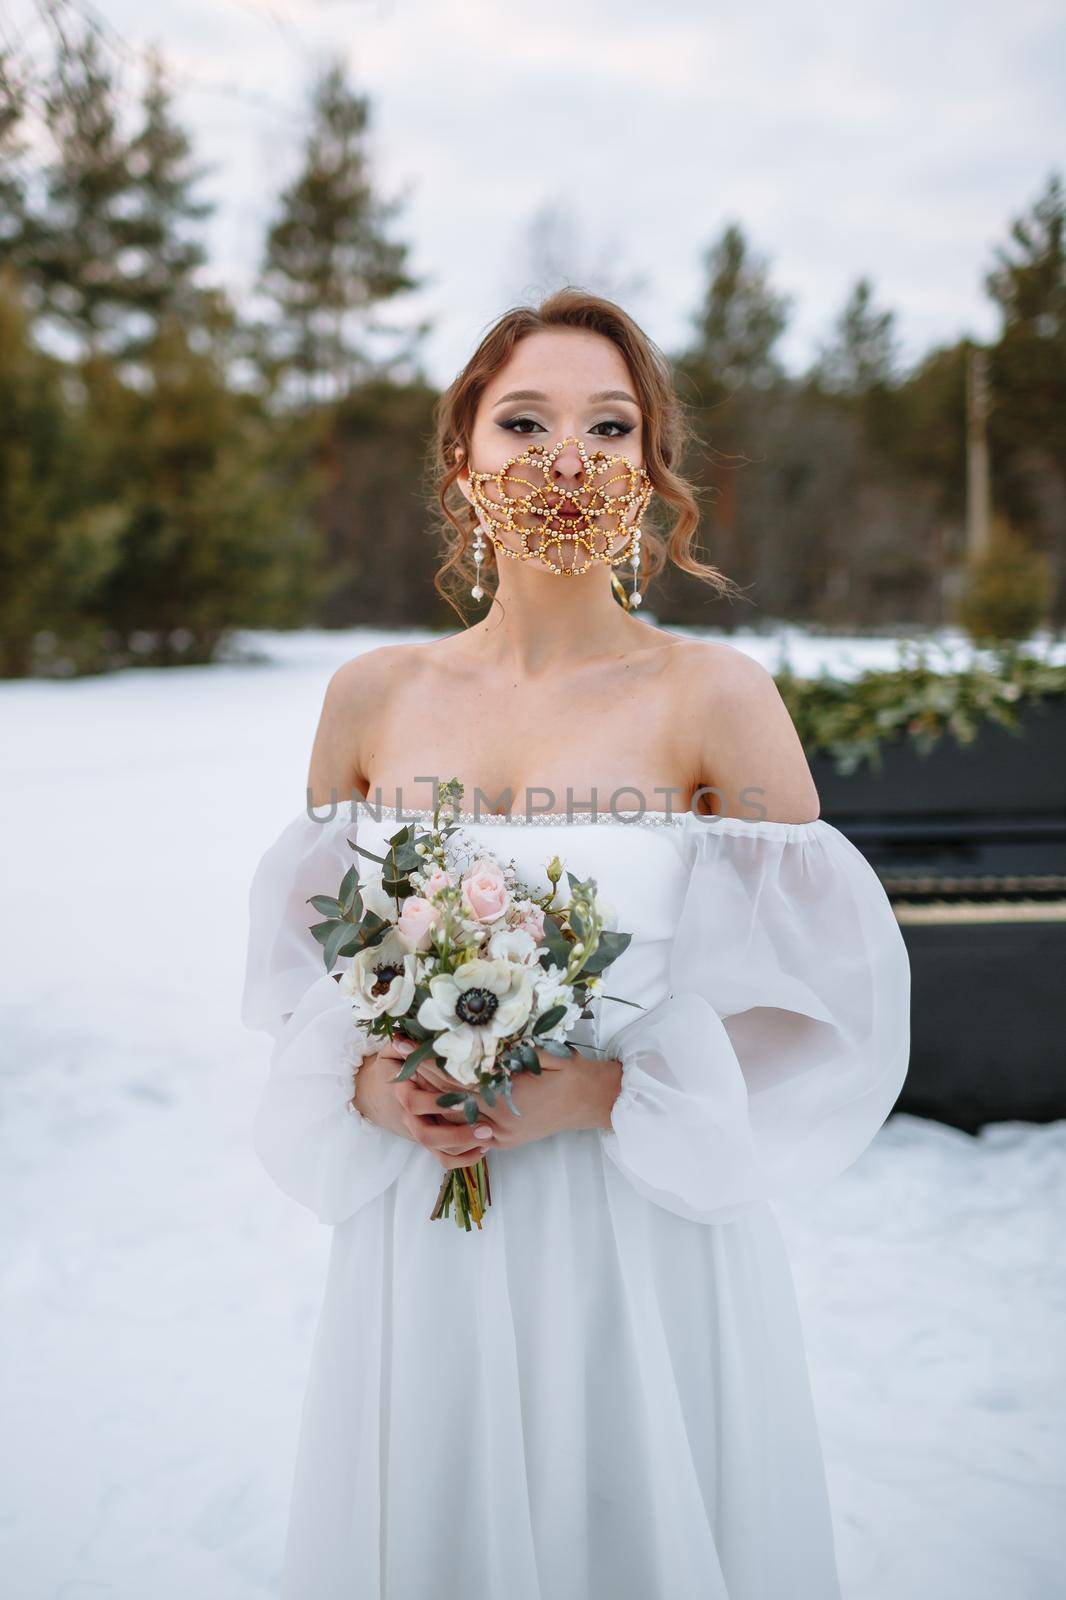 The bride is standing in a snow-covered forest. The bride is wearing a fabulous protective mask.